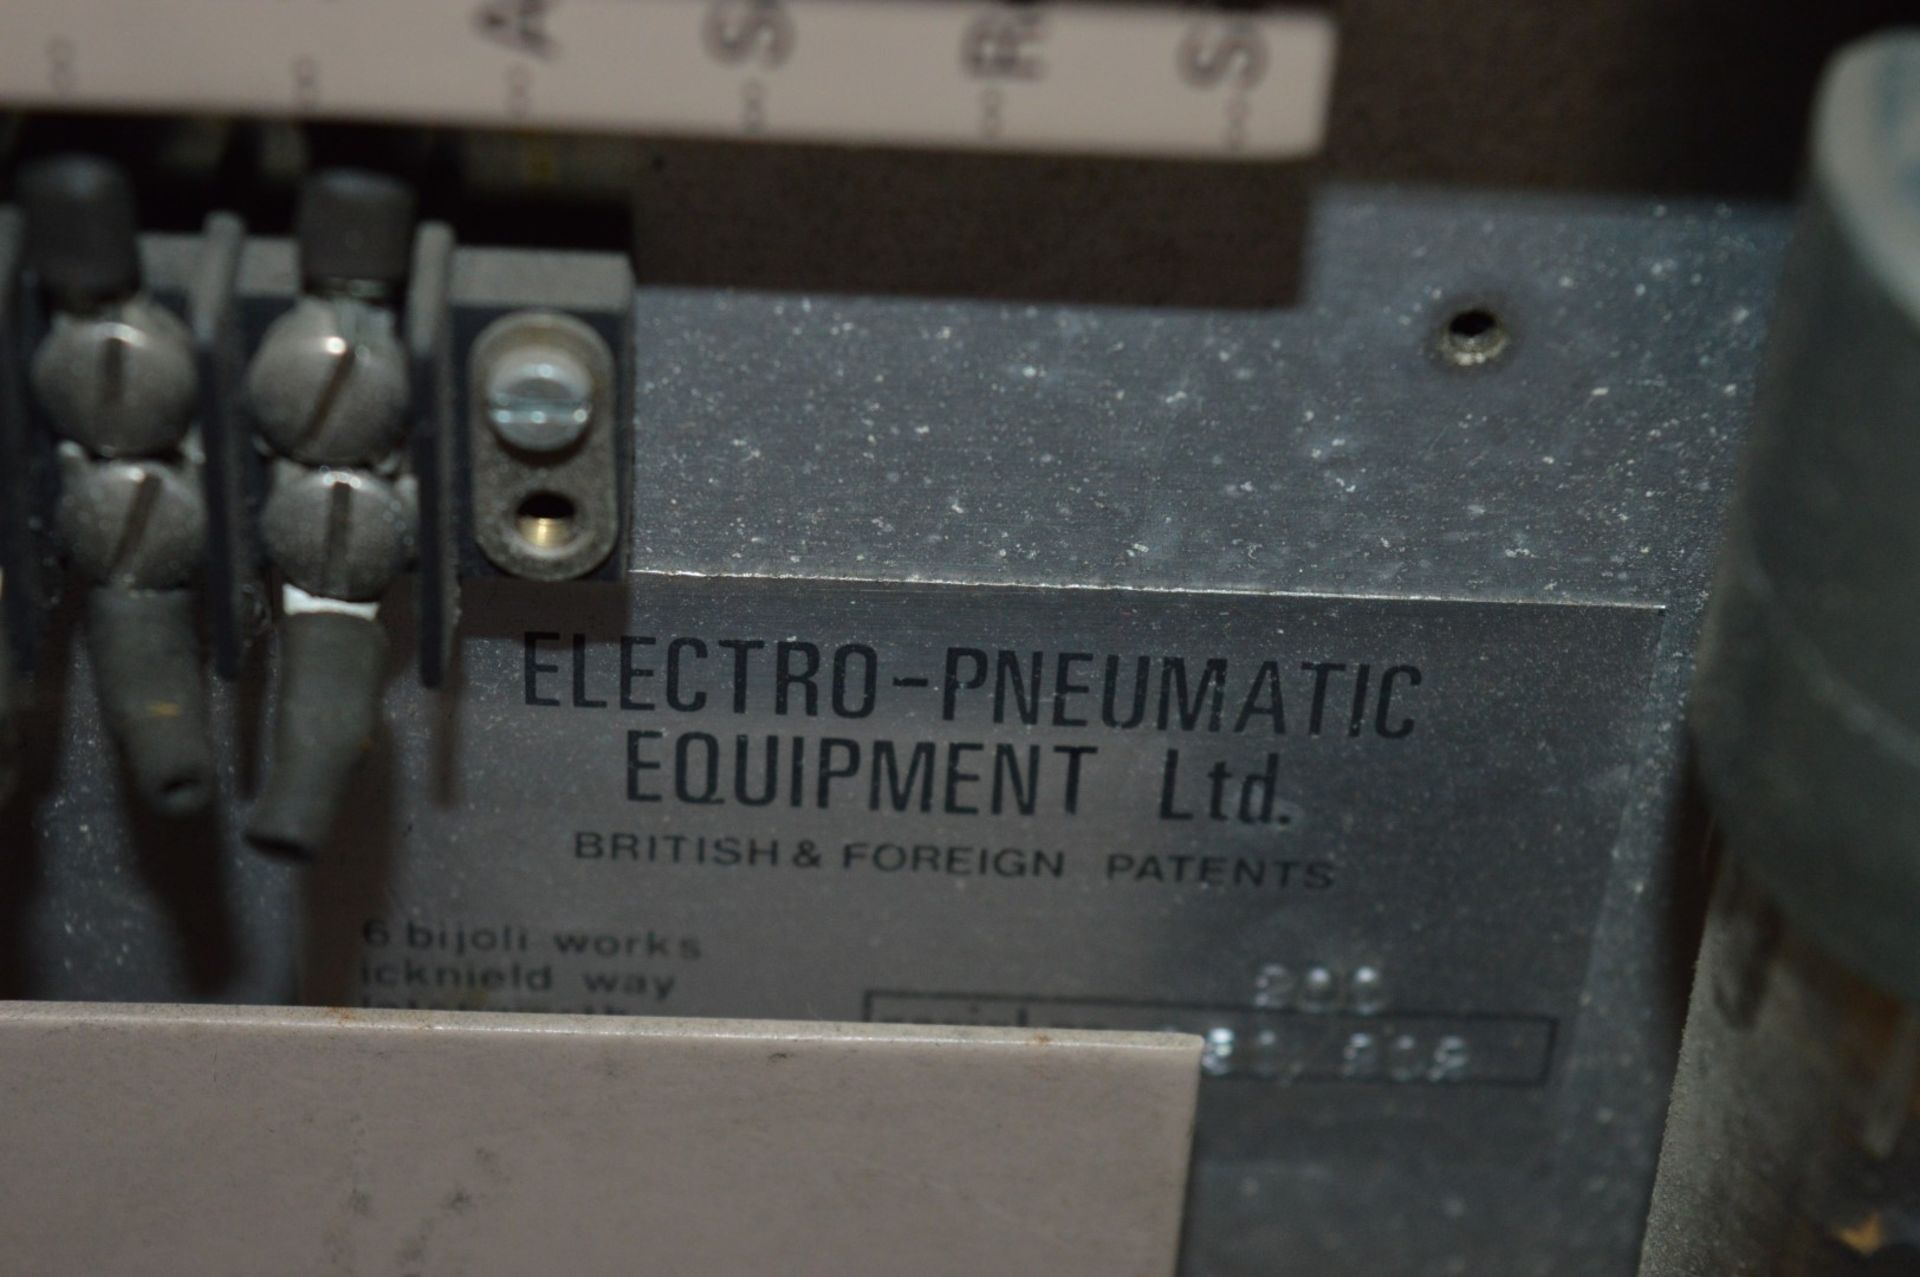 1 x Epetron 200 Mk2 Electro Pneumatic Tester - Vintage Test Equipment - CL011 - Ref J611 - Location: - Image 7 of 8